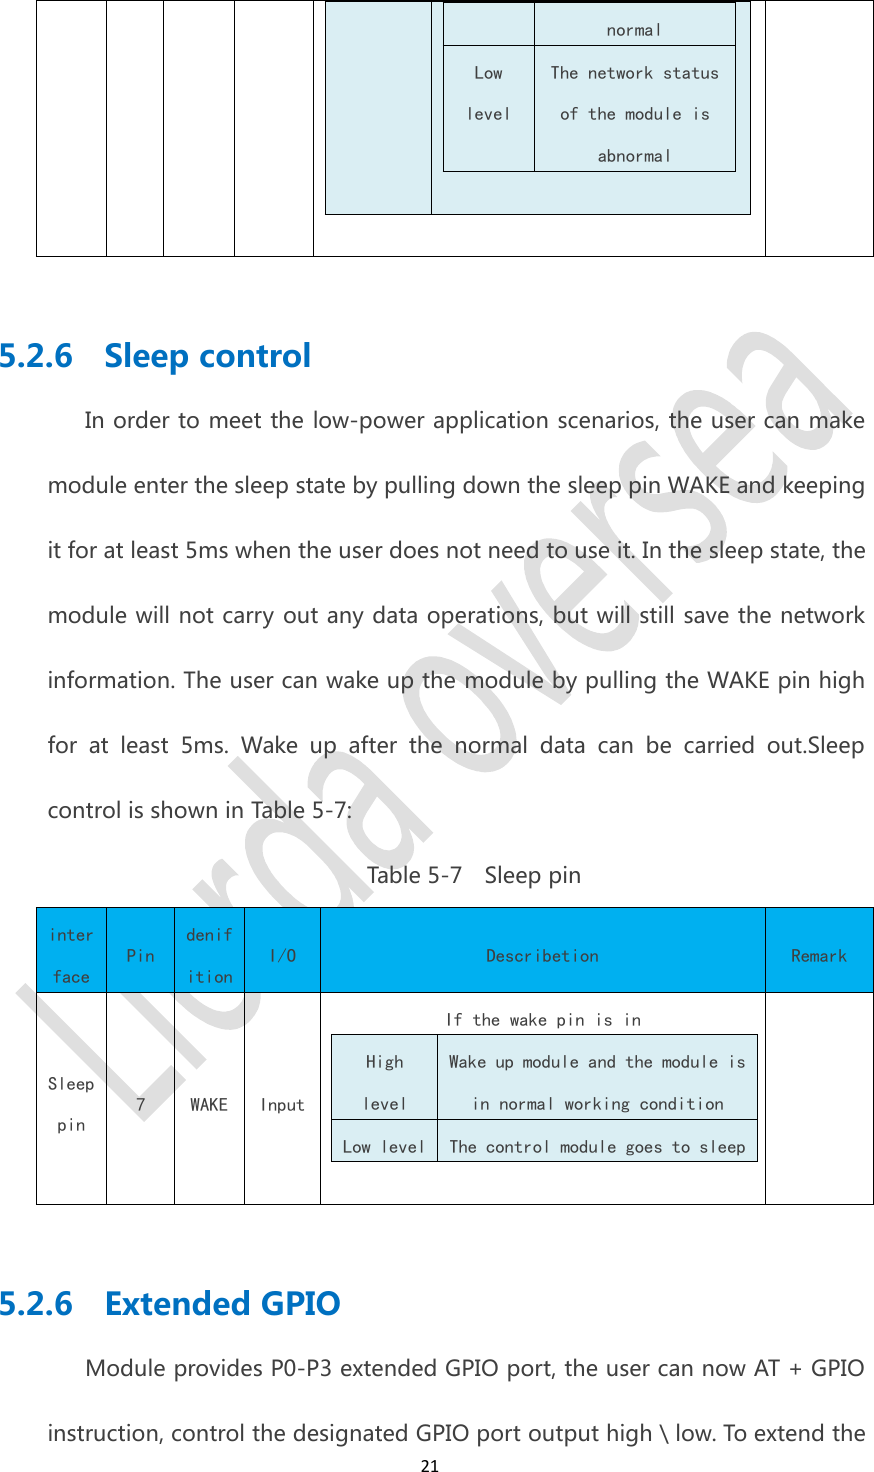 21normalLowlevelThe network statusof the module isabnormal5.2.6 Sleep controlIn order to meet the low-power application scenarios, the user can makemodule enter the sleep state by pulling down the sleep pin WAKE and keepingit for at least 5ms when the user does not need to use it. In the sleep state, themodule will not carry out any data operations, but will still save the networkinformation. The user can wake up the module by pulling the WAKE pin highfor at least 5ms. Wake up after the normal data can be carried out.Sleepcontrol is shown in Table 5-7:Table 5-7 Sleep pininterfacePindenifitionI/ODescribetionRemarkSleeppin7WAKEInputIf the wake pin is inHighlevelWake up module and the module isin normal working conditionLow levelThe control module goes to sleep5.2.6 Extended GPIOModule provides P0-P3 extended GPIO port, the user can now AT + GPIOinstruction, control the designated GPIO port output high \ low. To extend the